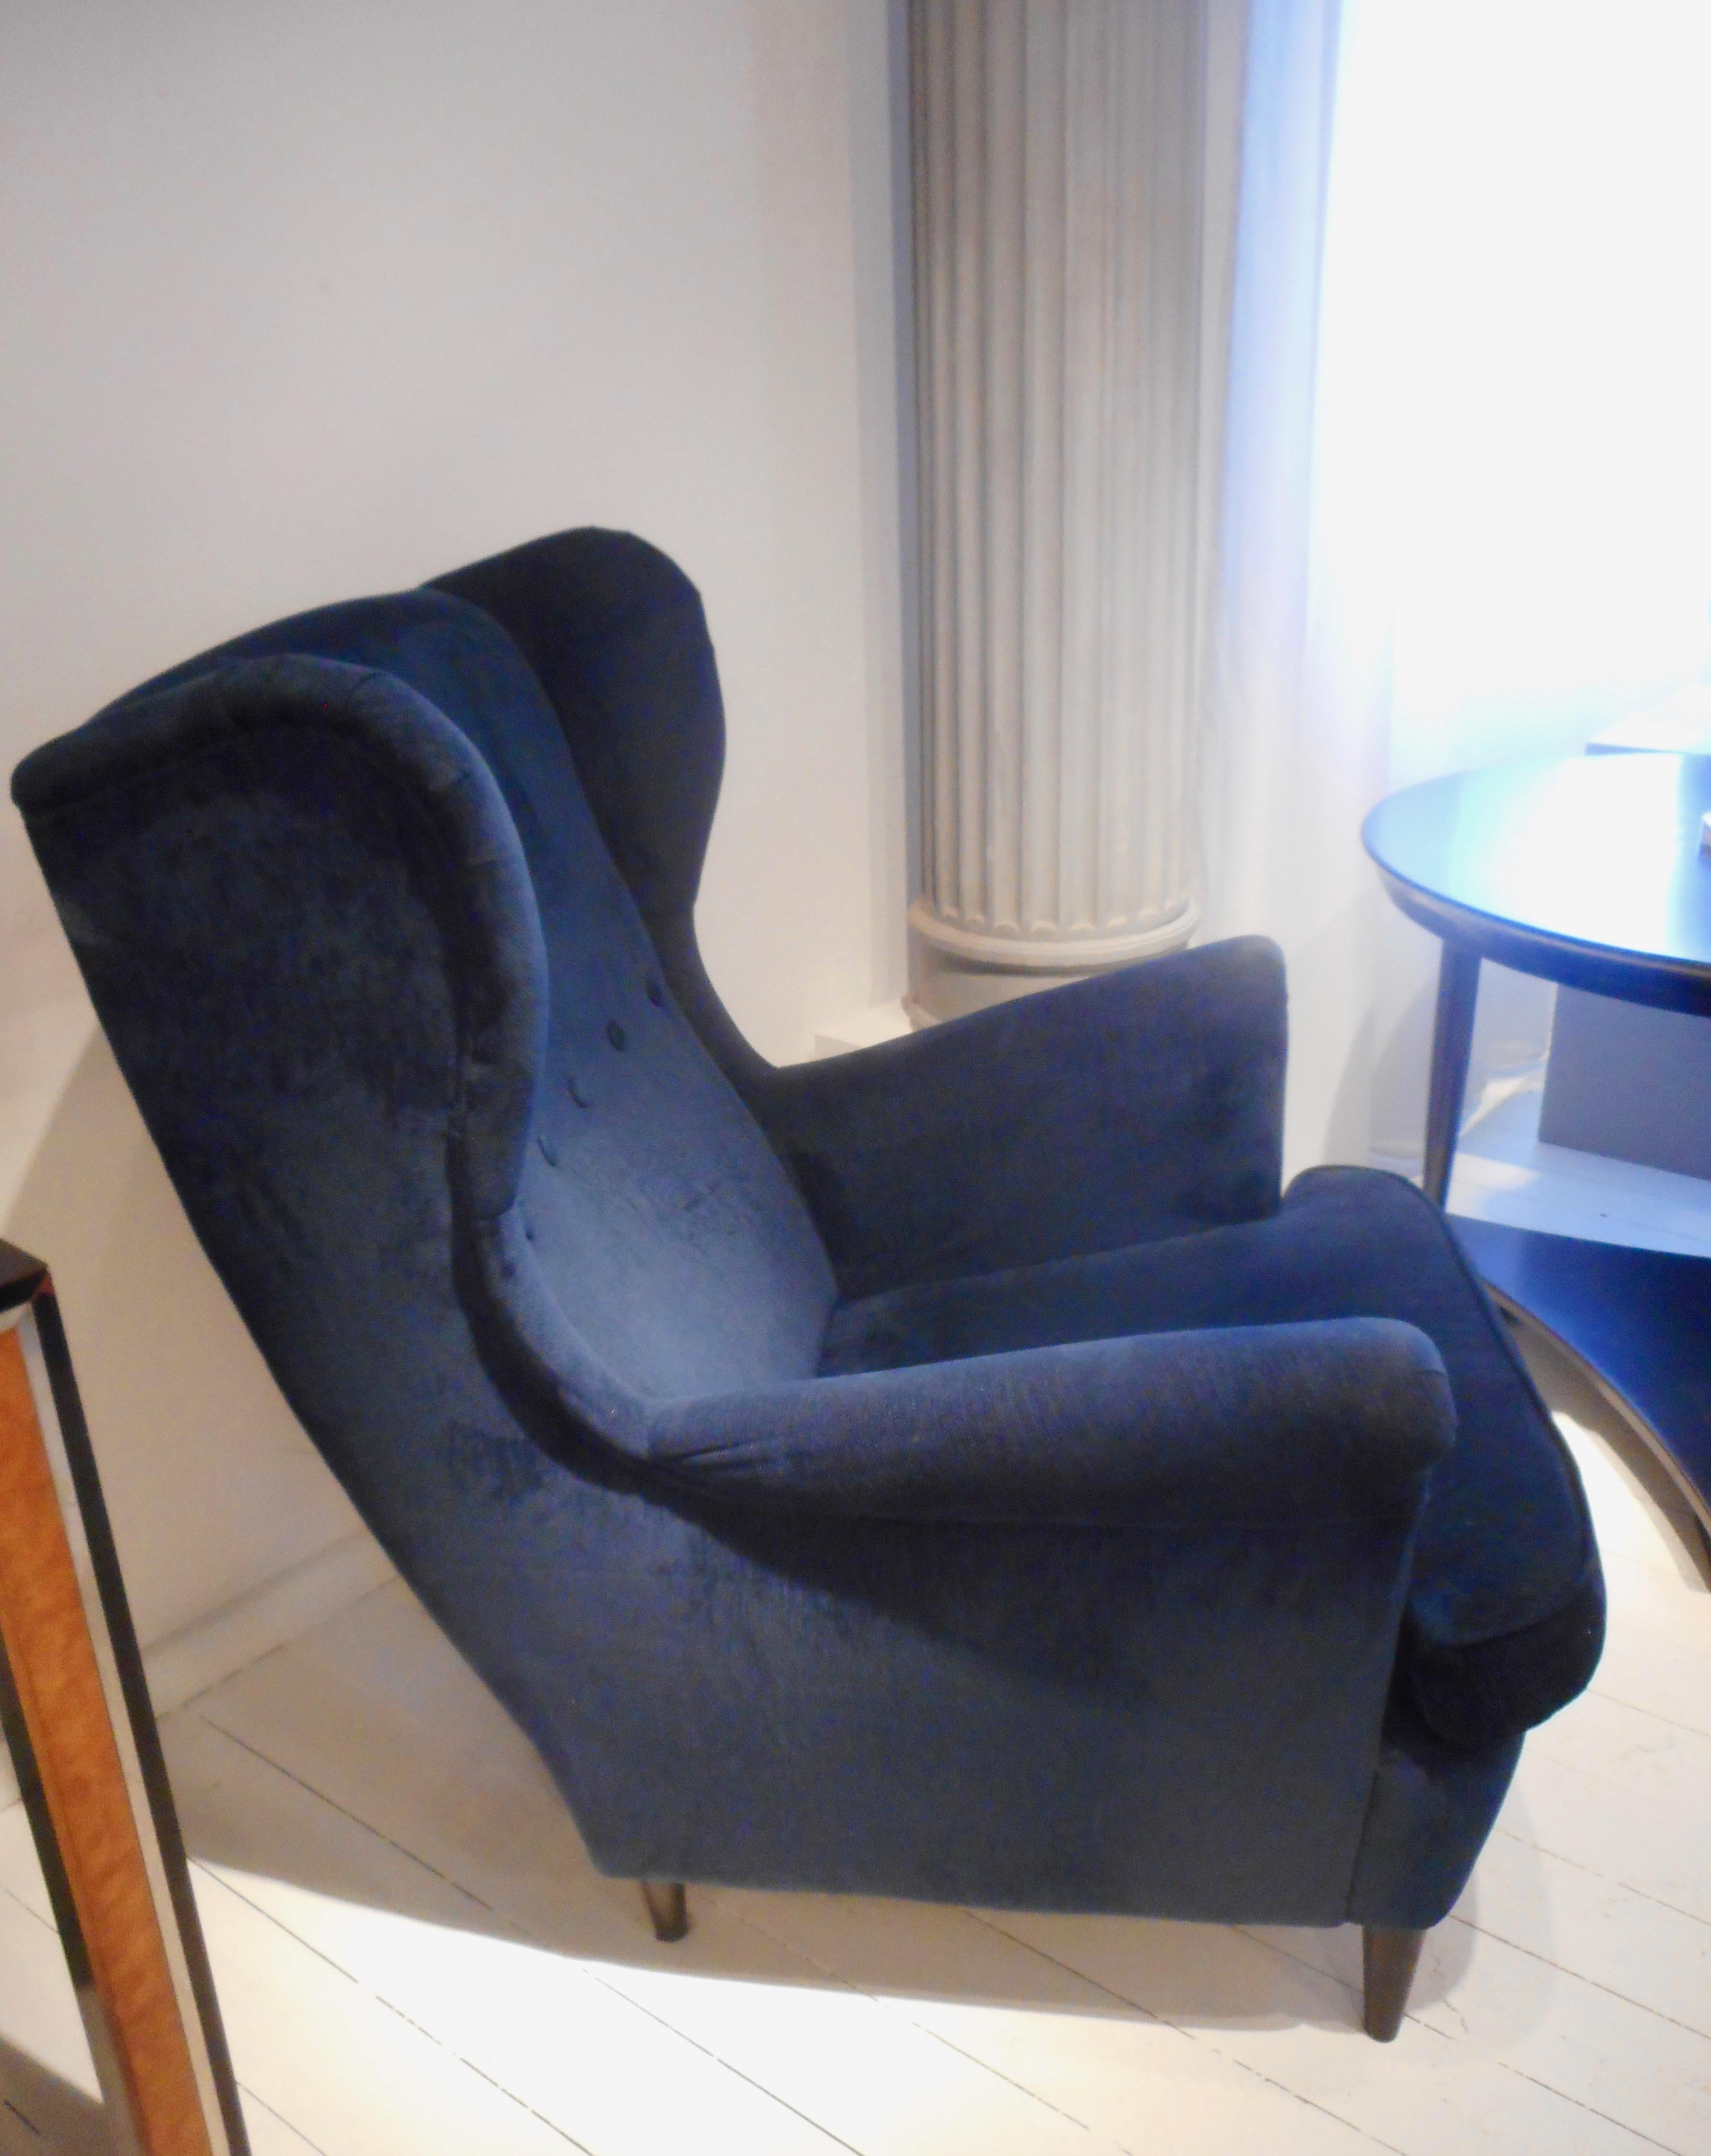 Deep blue velvet high back armchairs probably designed by Gio Ponti, circa 1950 for I.S.A. Bergamo.
   